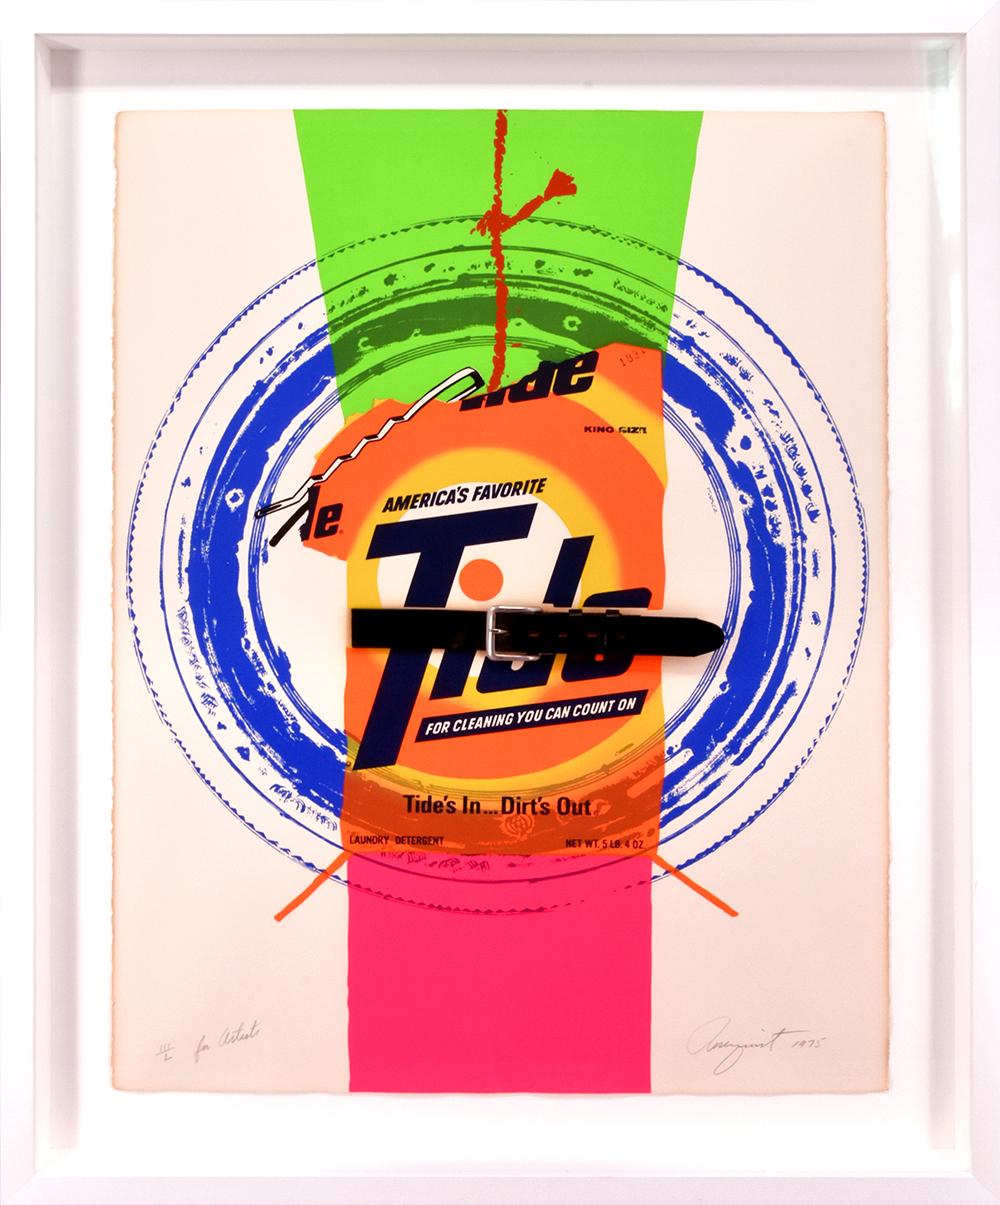 For Artists, 1975 - Print by James Rosenquist